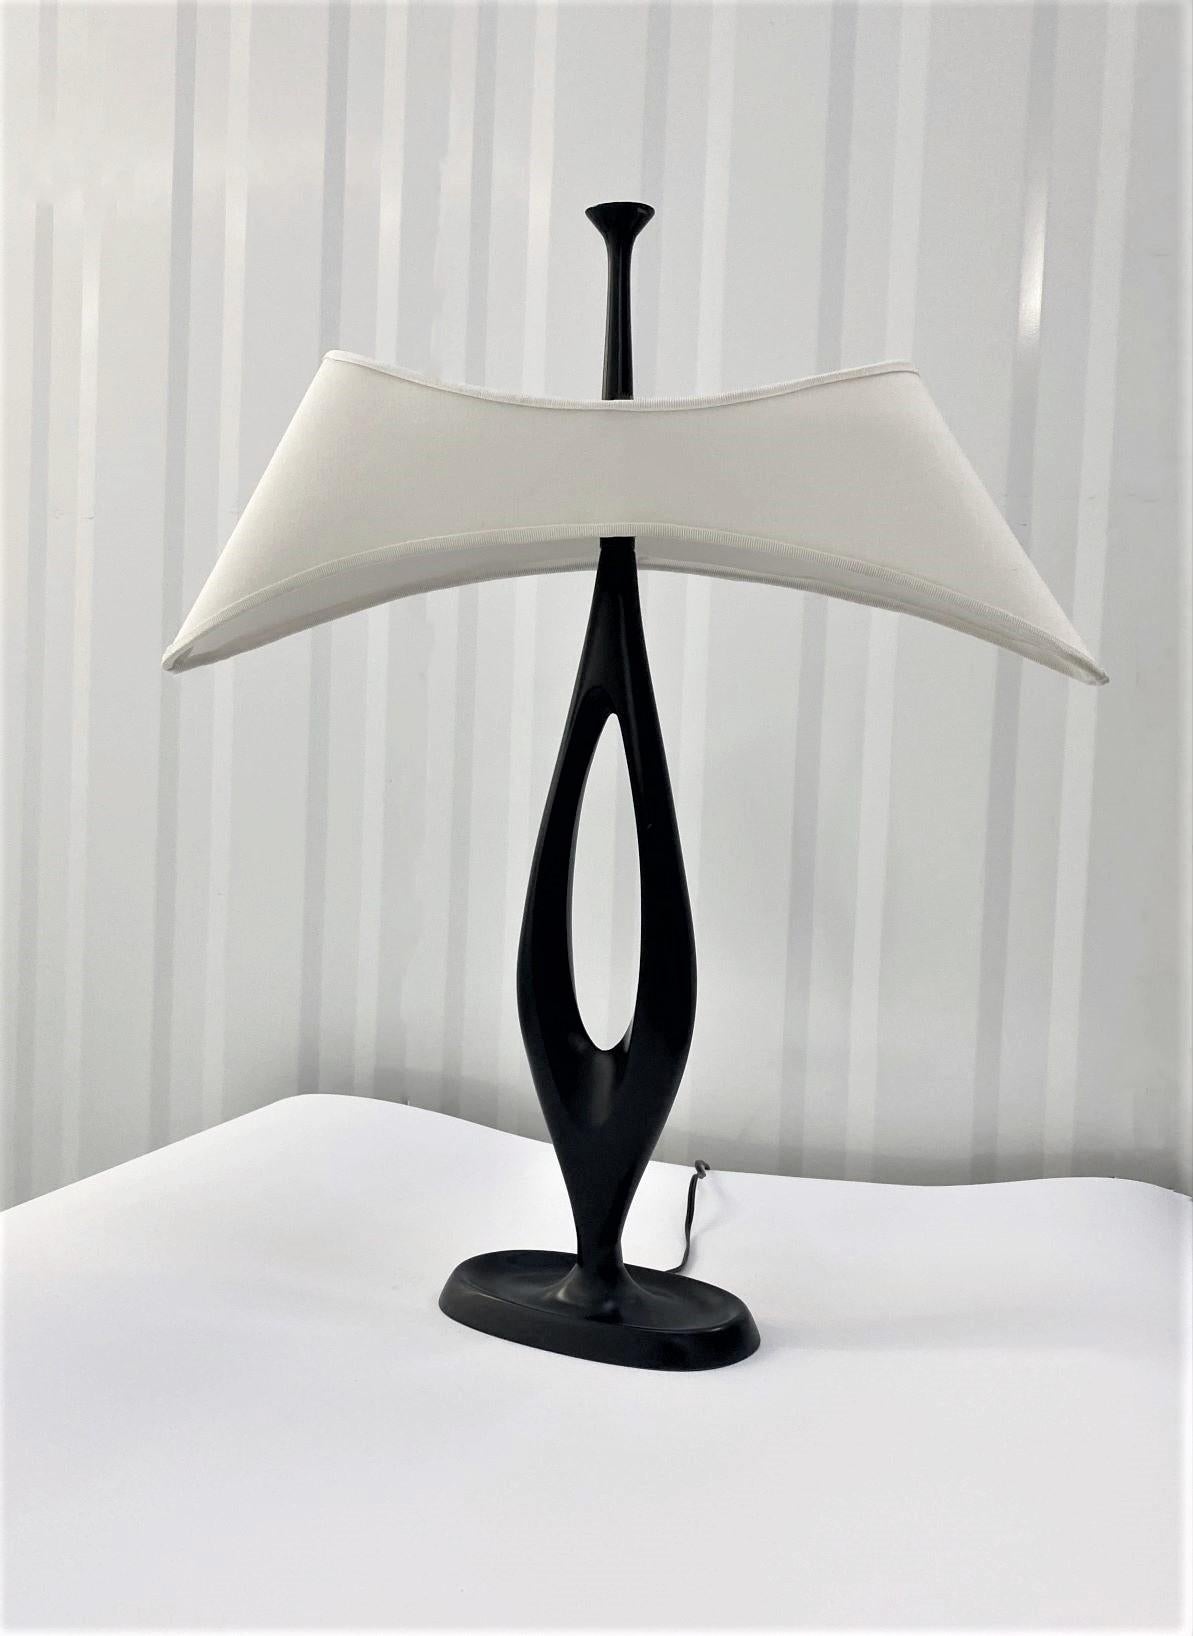 Rare One of Two Table Lamps by Max Ingrand for Fontana Arte, 1955-1956, Italy For Sale 1